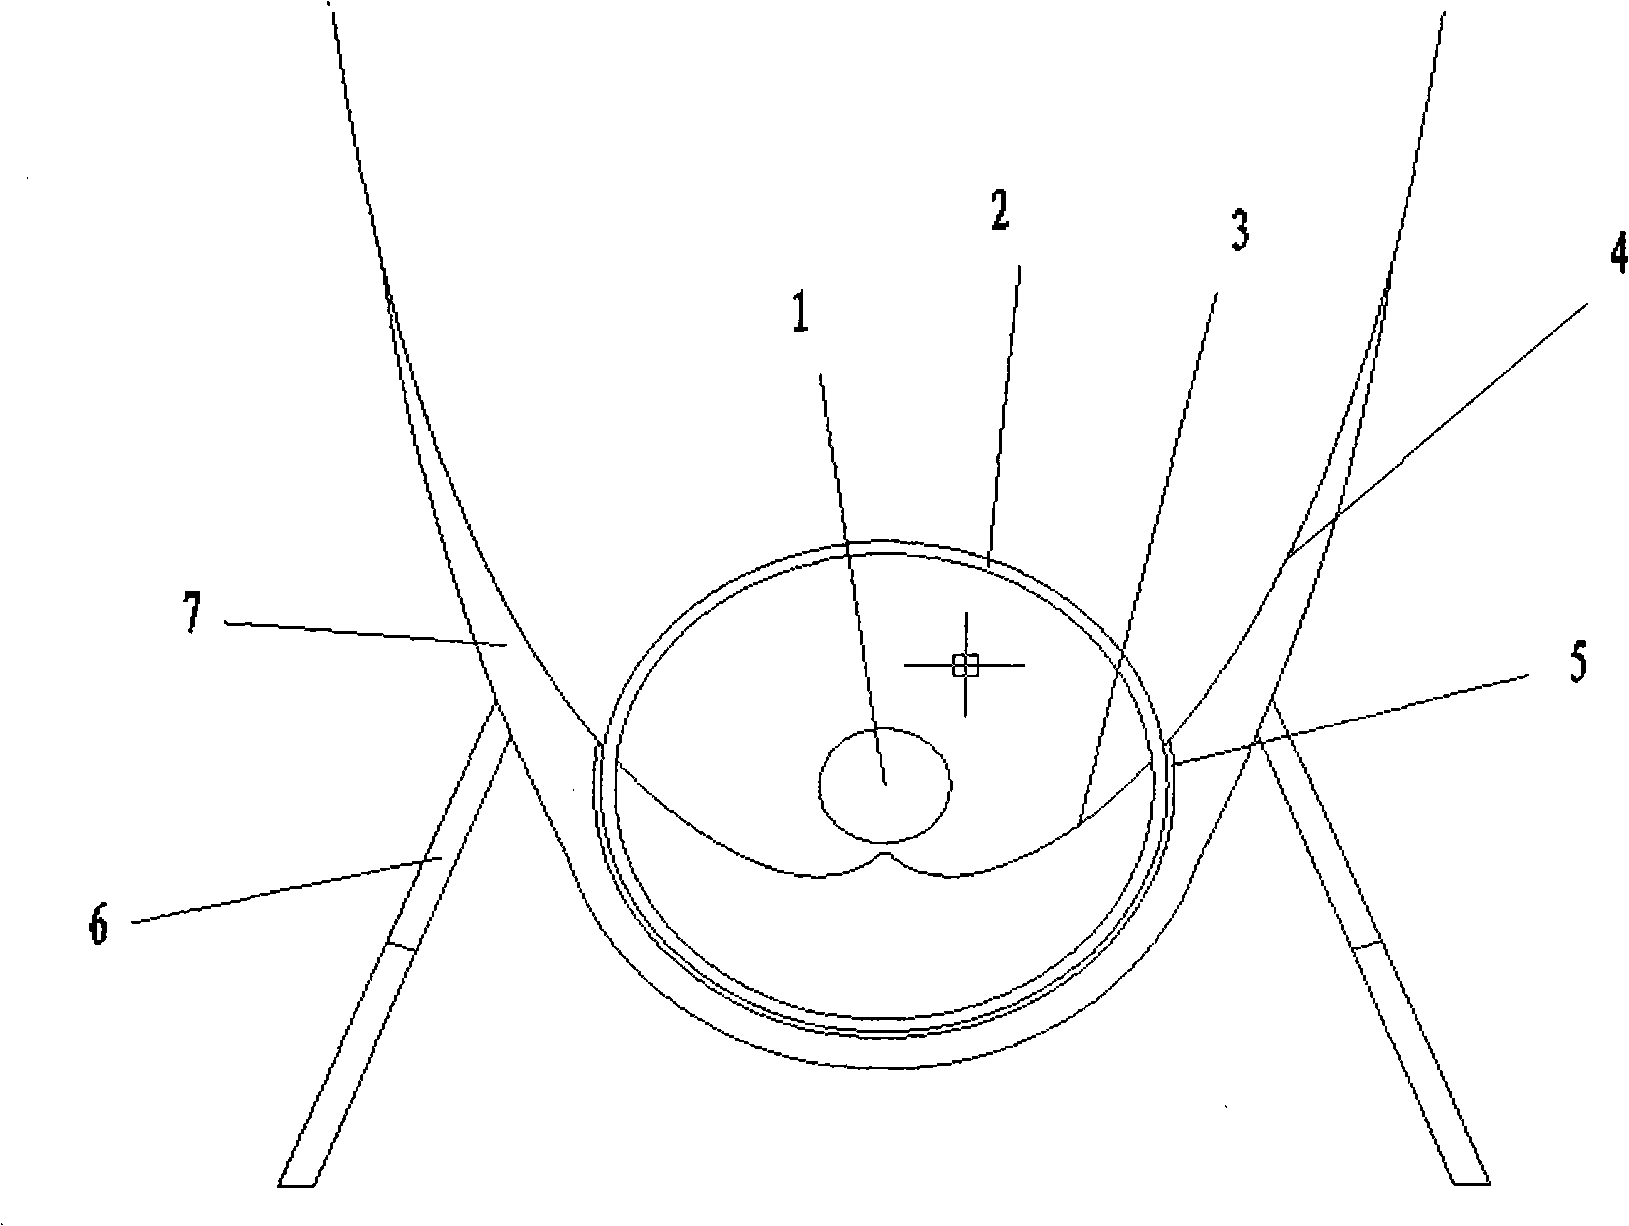 Compound parabolic condenser combining inside condensation and outside condensation